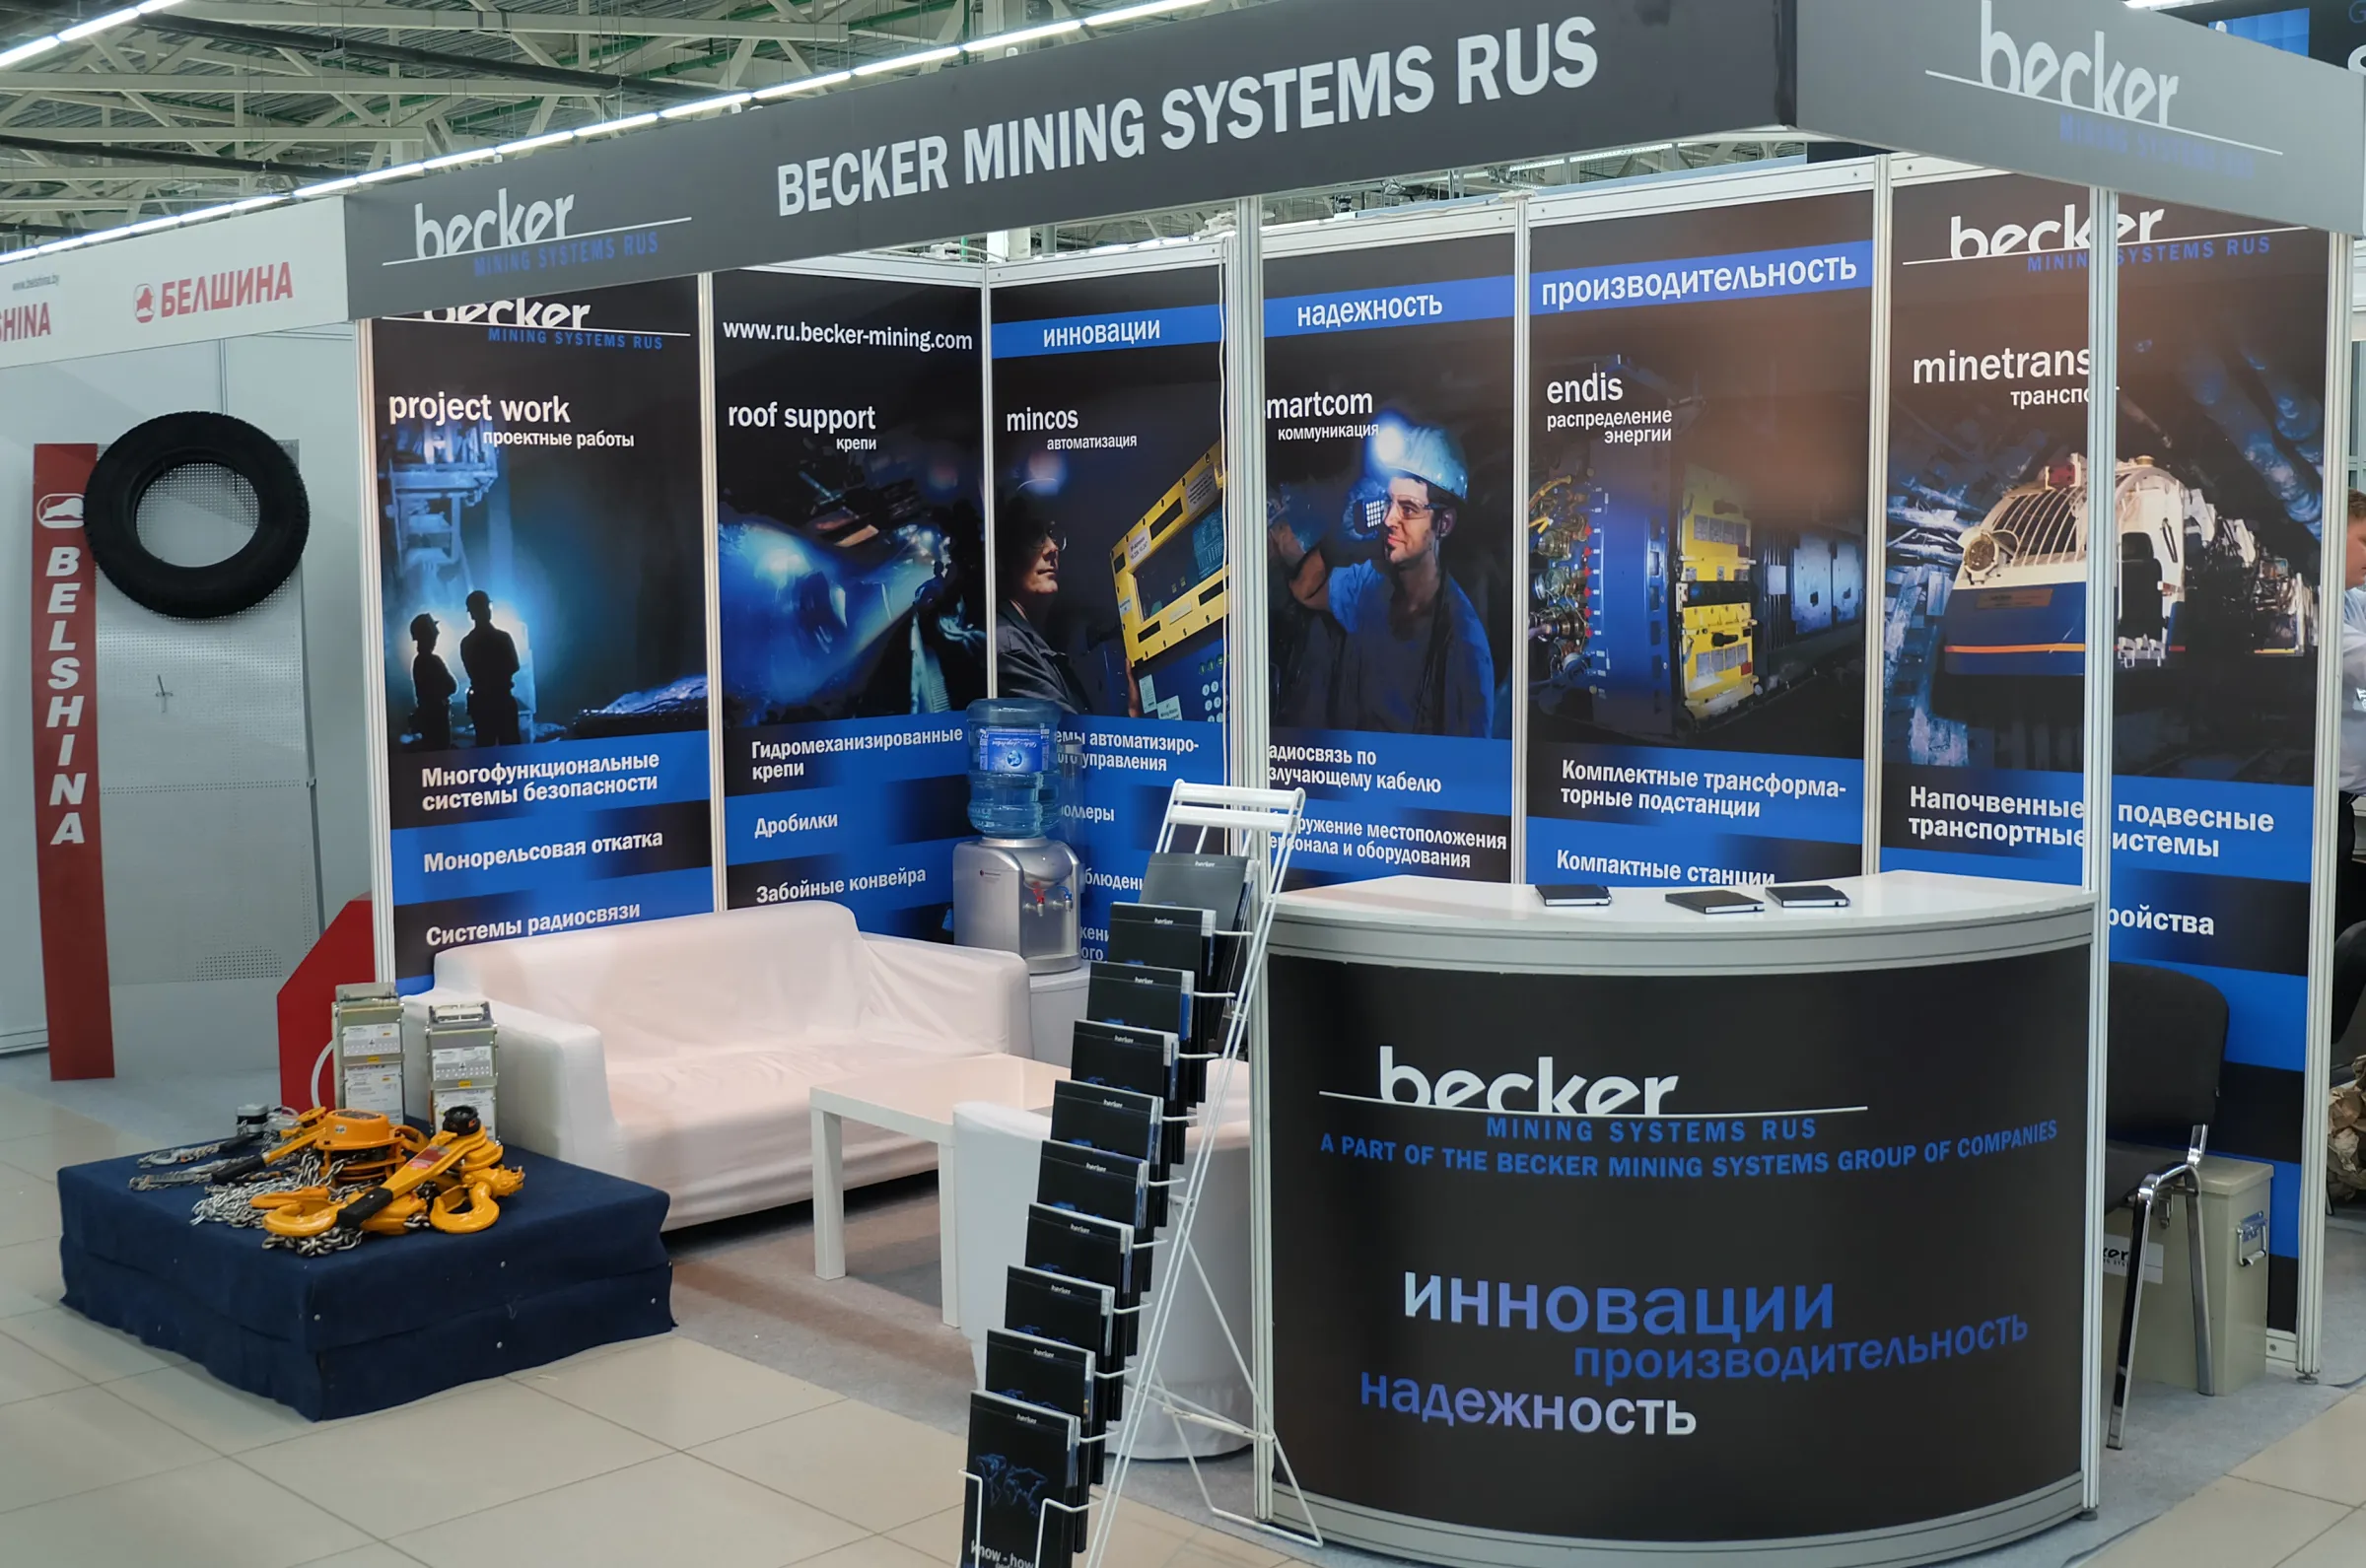 Picture of the beckermining RUS booth